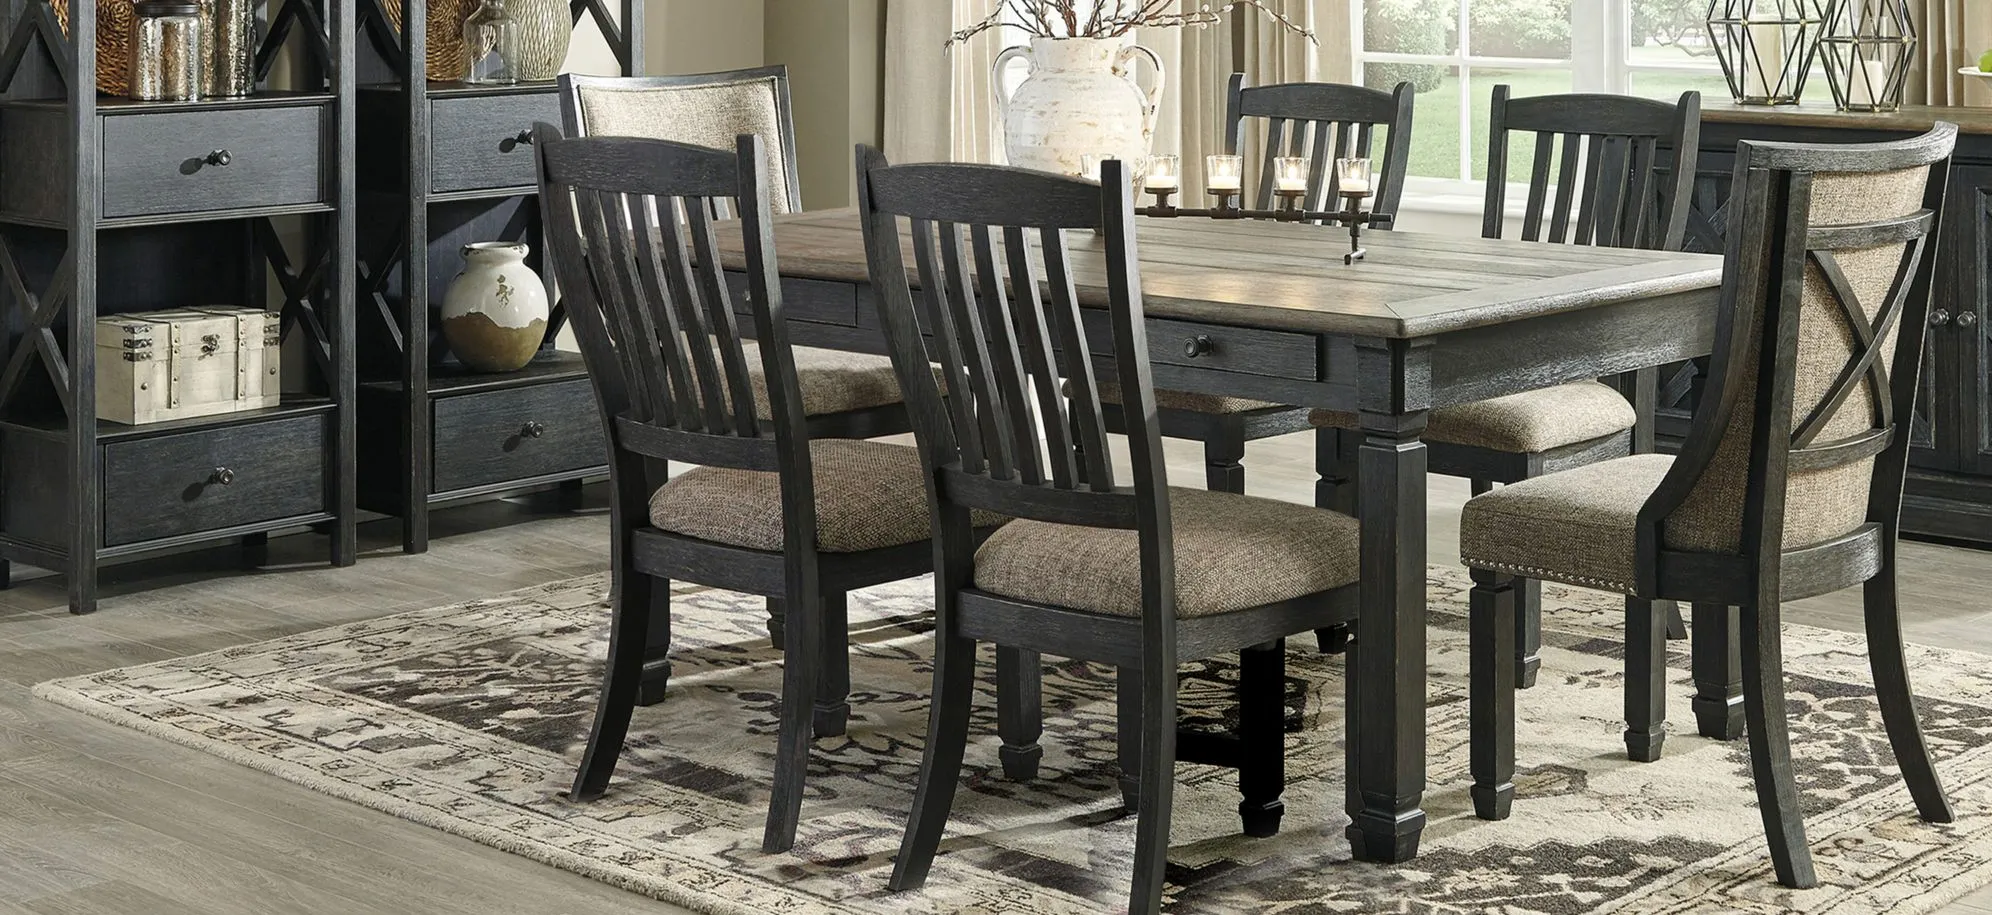 Vail 7-pc. Dining Set in Gray / Black by Ashley Furniture